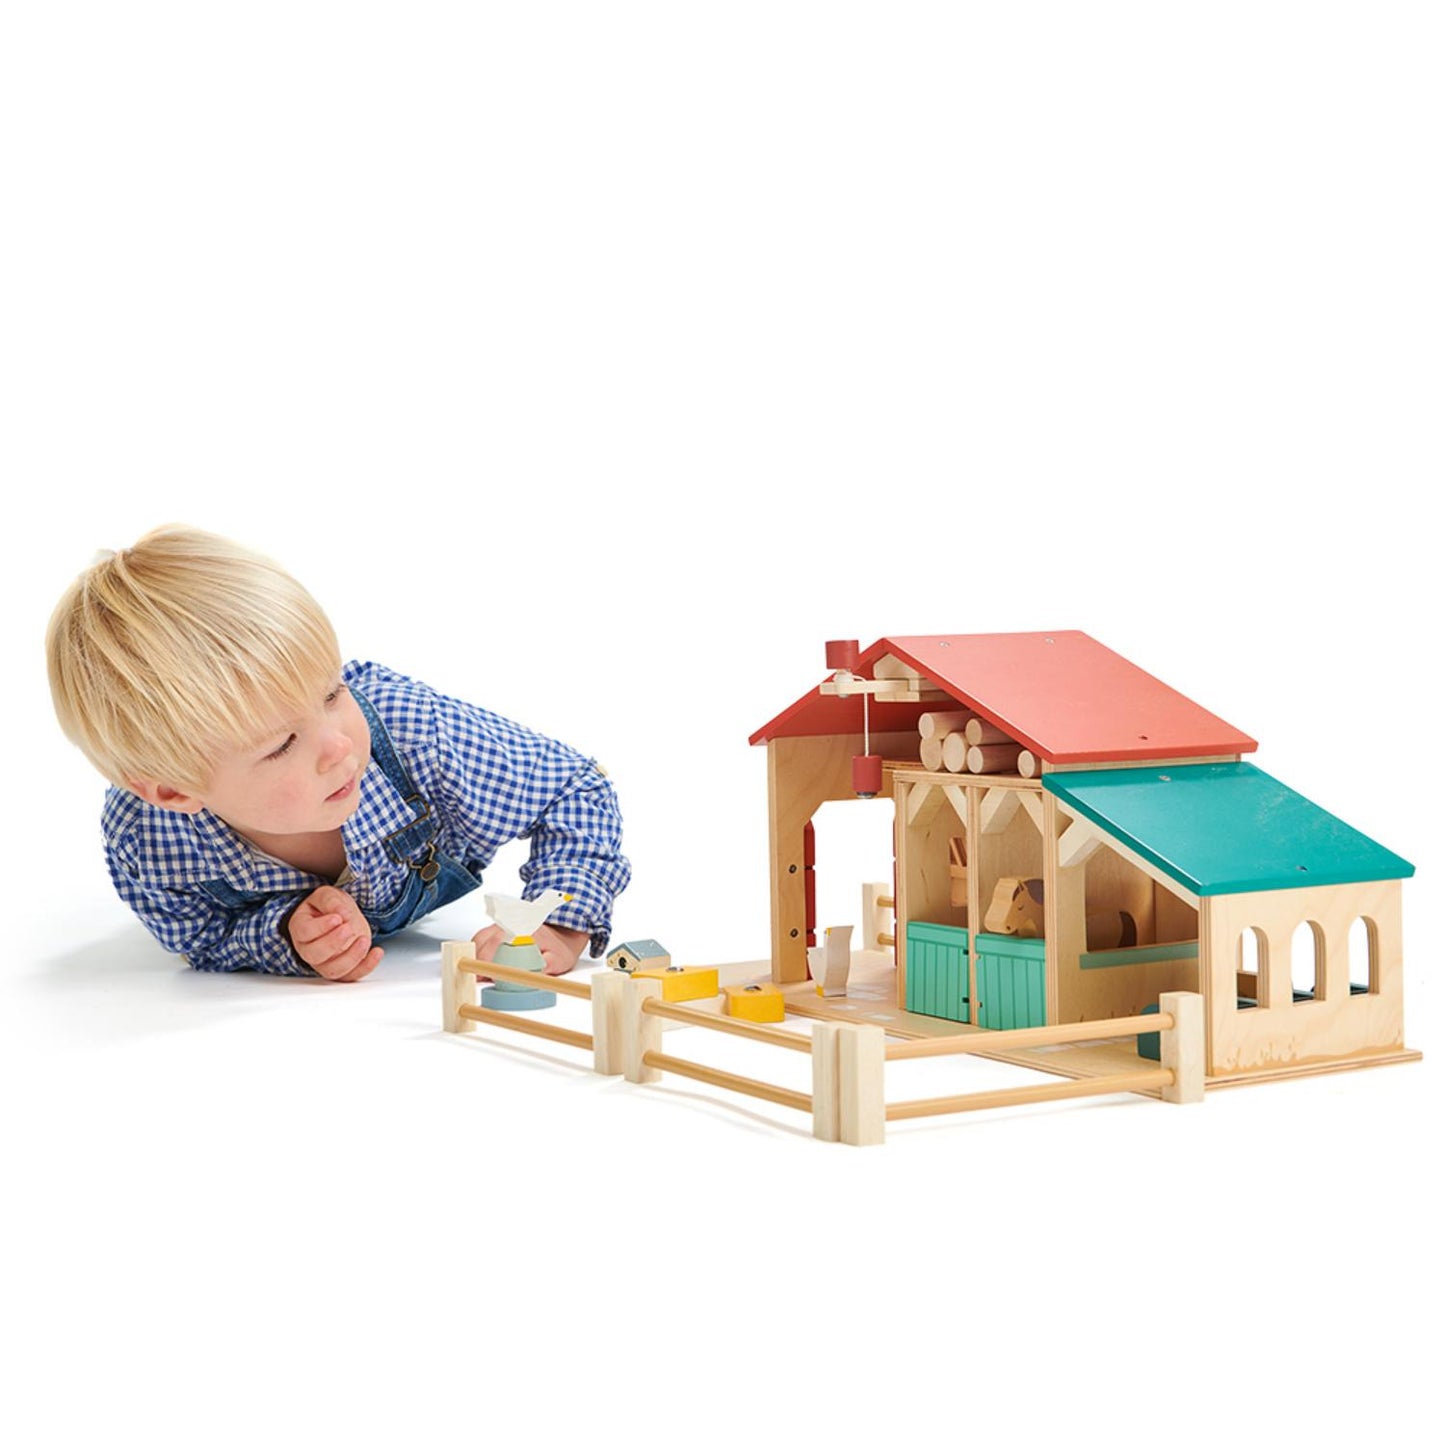 Tender Leaf Toys Wooden Farm | Wooden Toy Play Set For Kids | Lifestyle – Boy Playing With Farm | BeoVERDE.ie